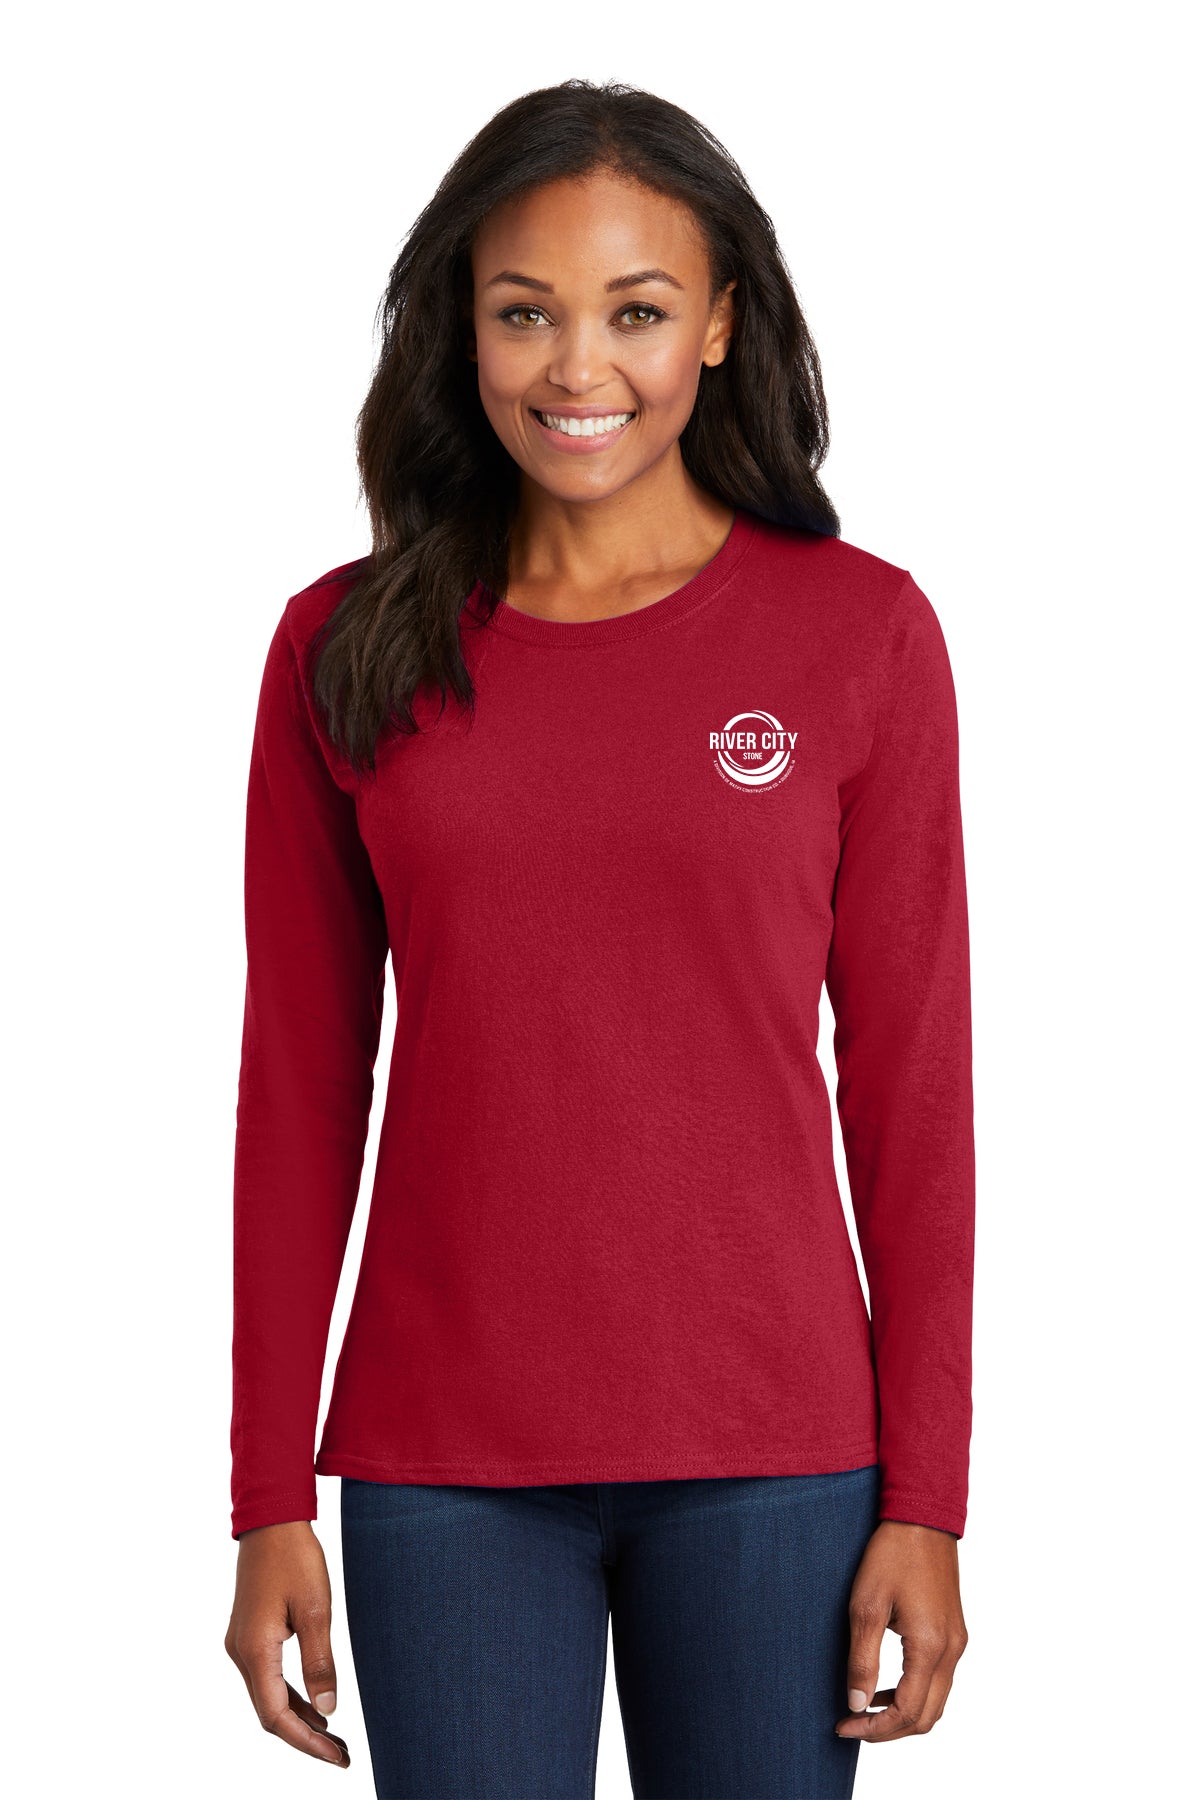 River City Stone Ladies Long Sleeve – Multiple Colors